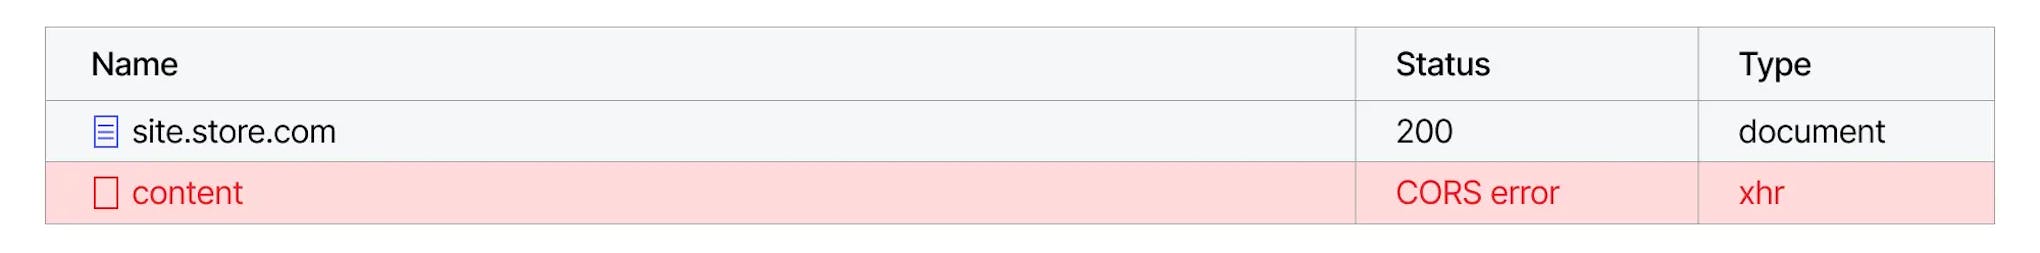 The browser showing the request status as a CORS error